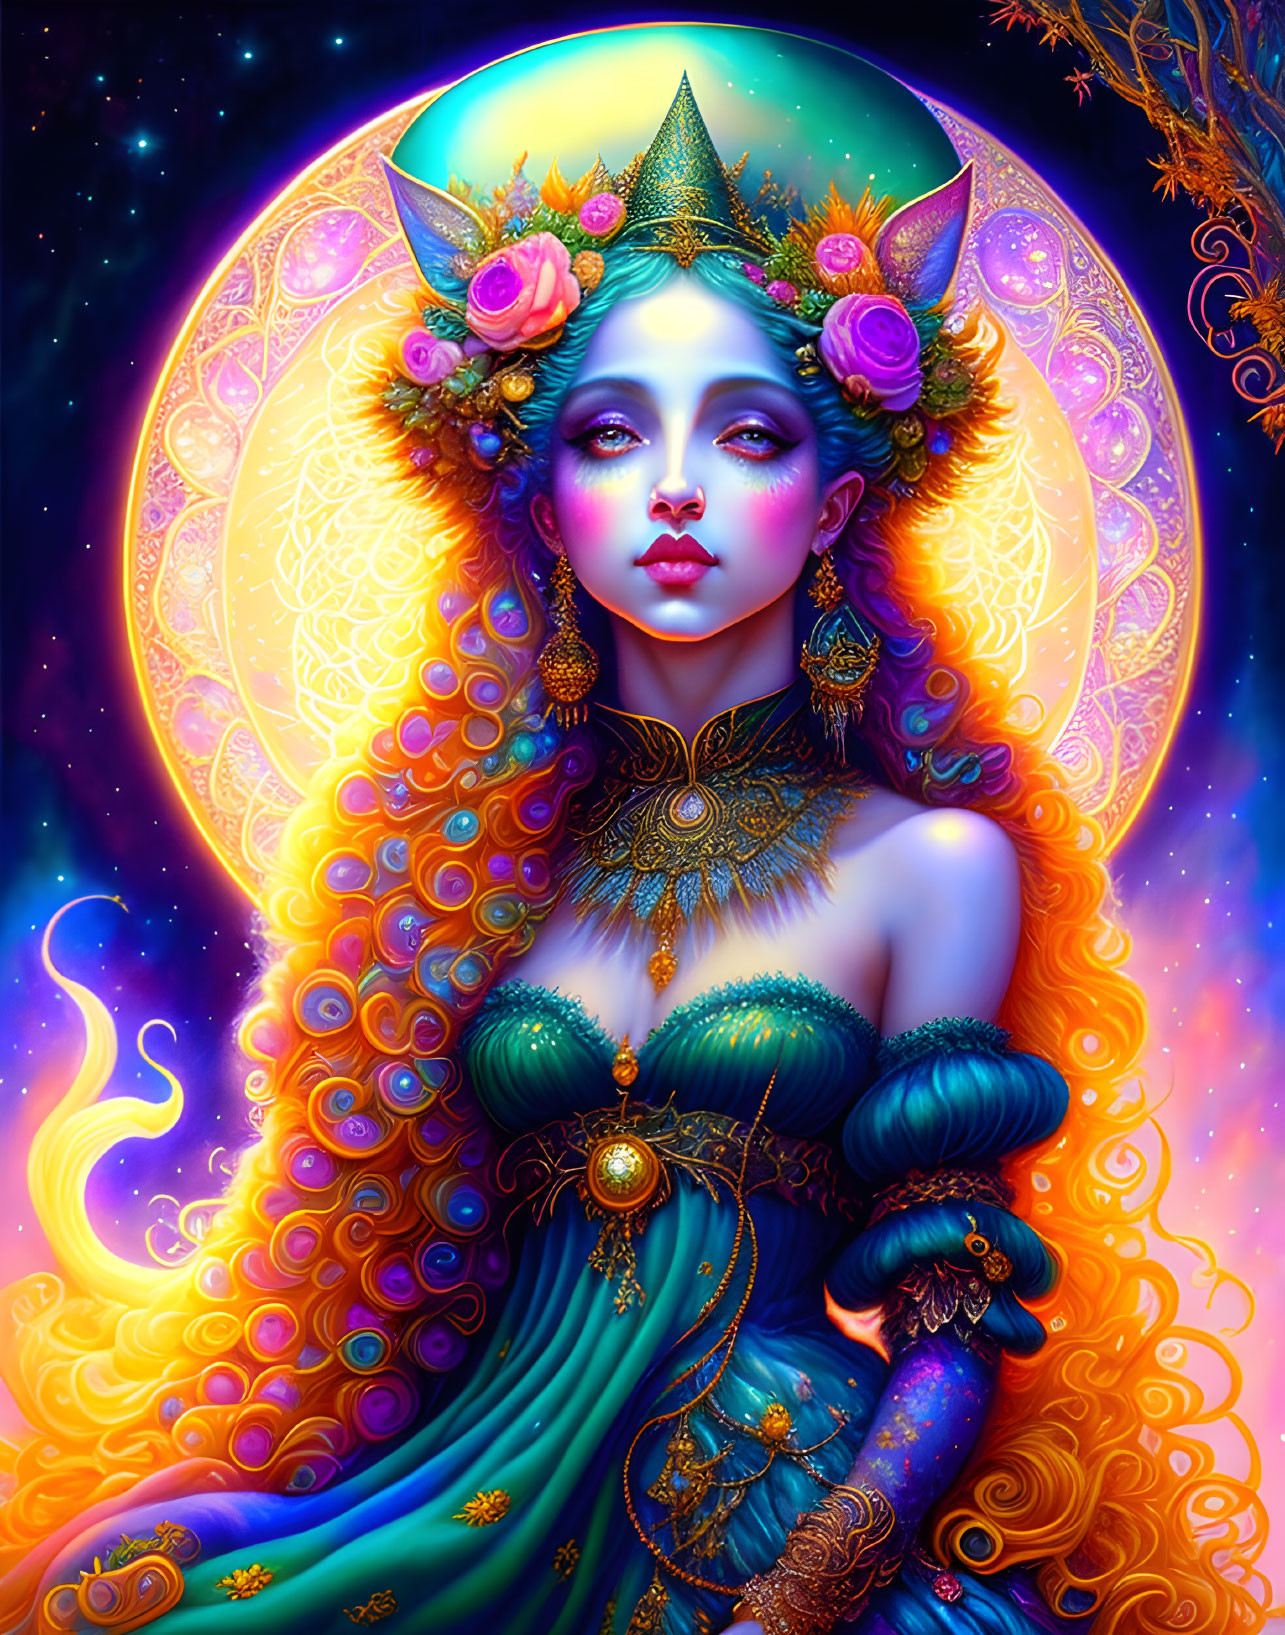 Colorful portrait of a woman in ornate attire against celestial background